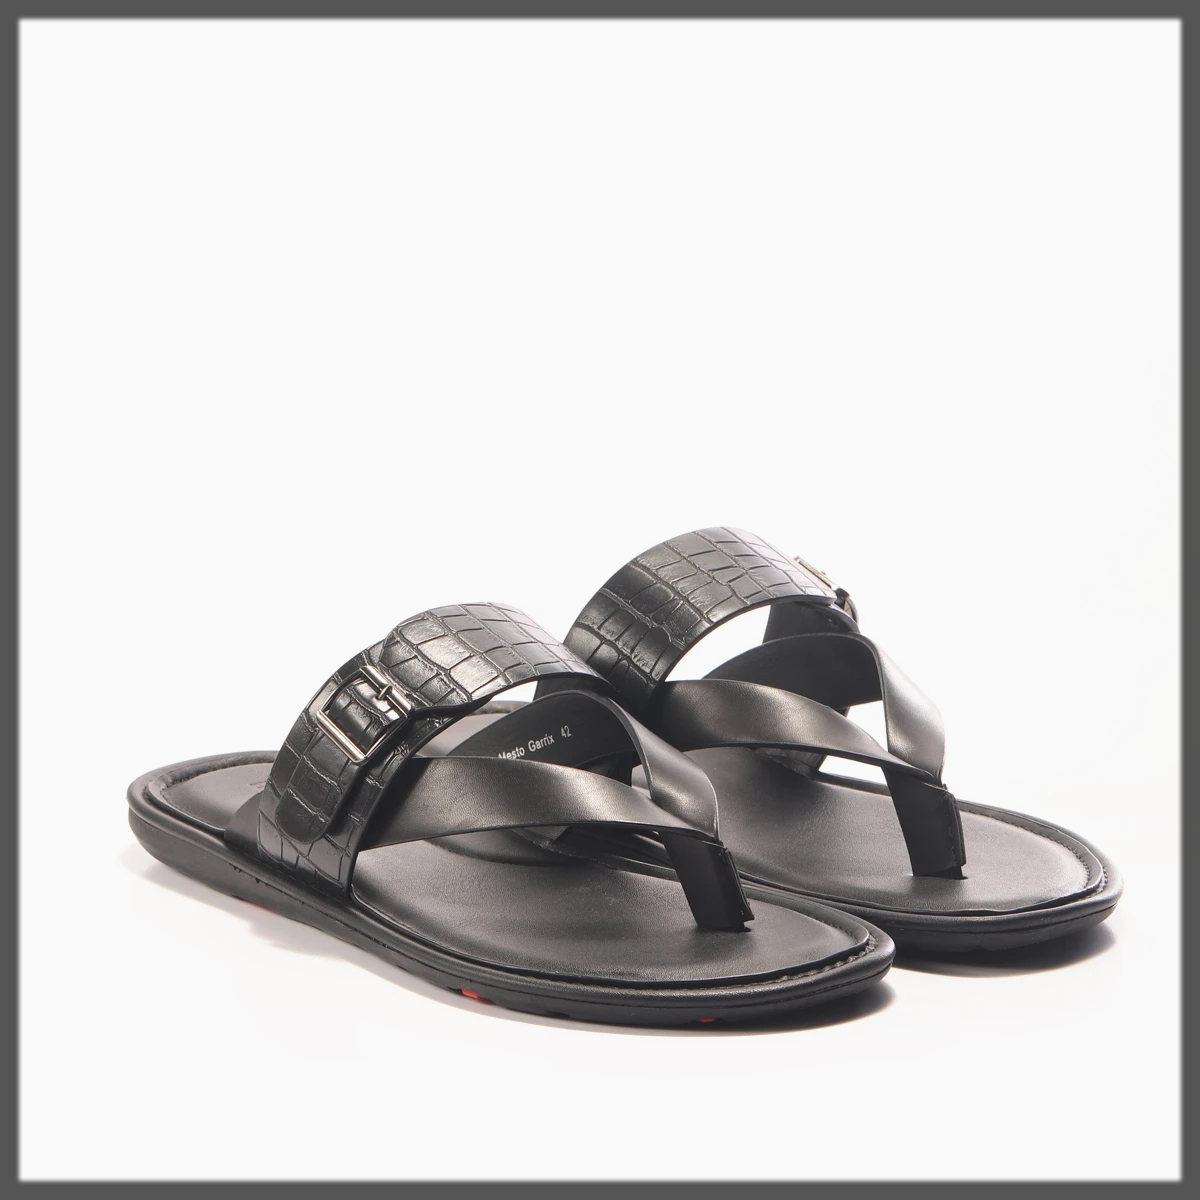 black summer chappal for men by hush puppies